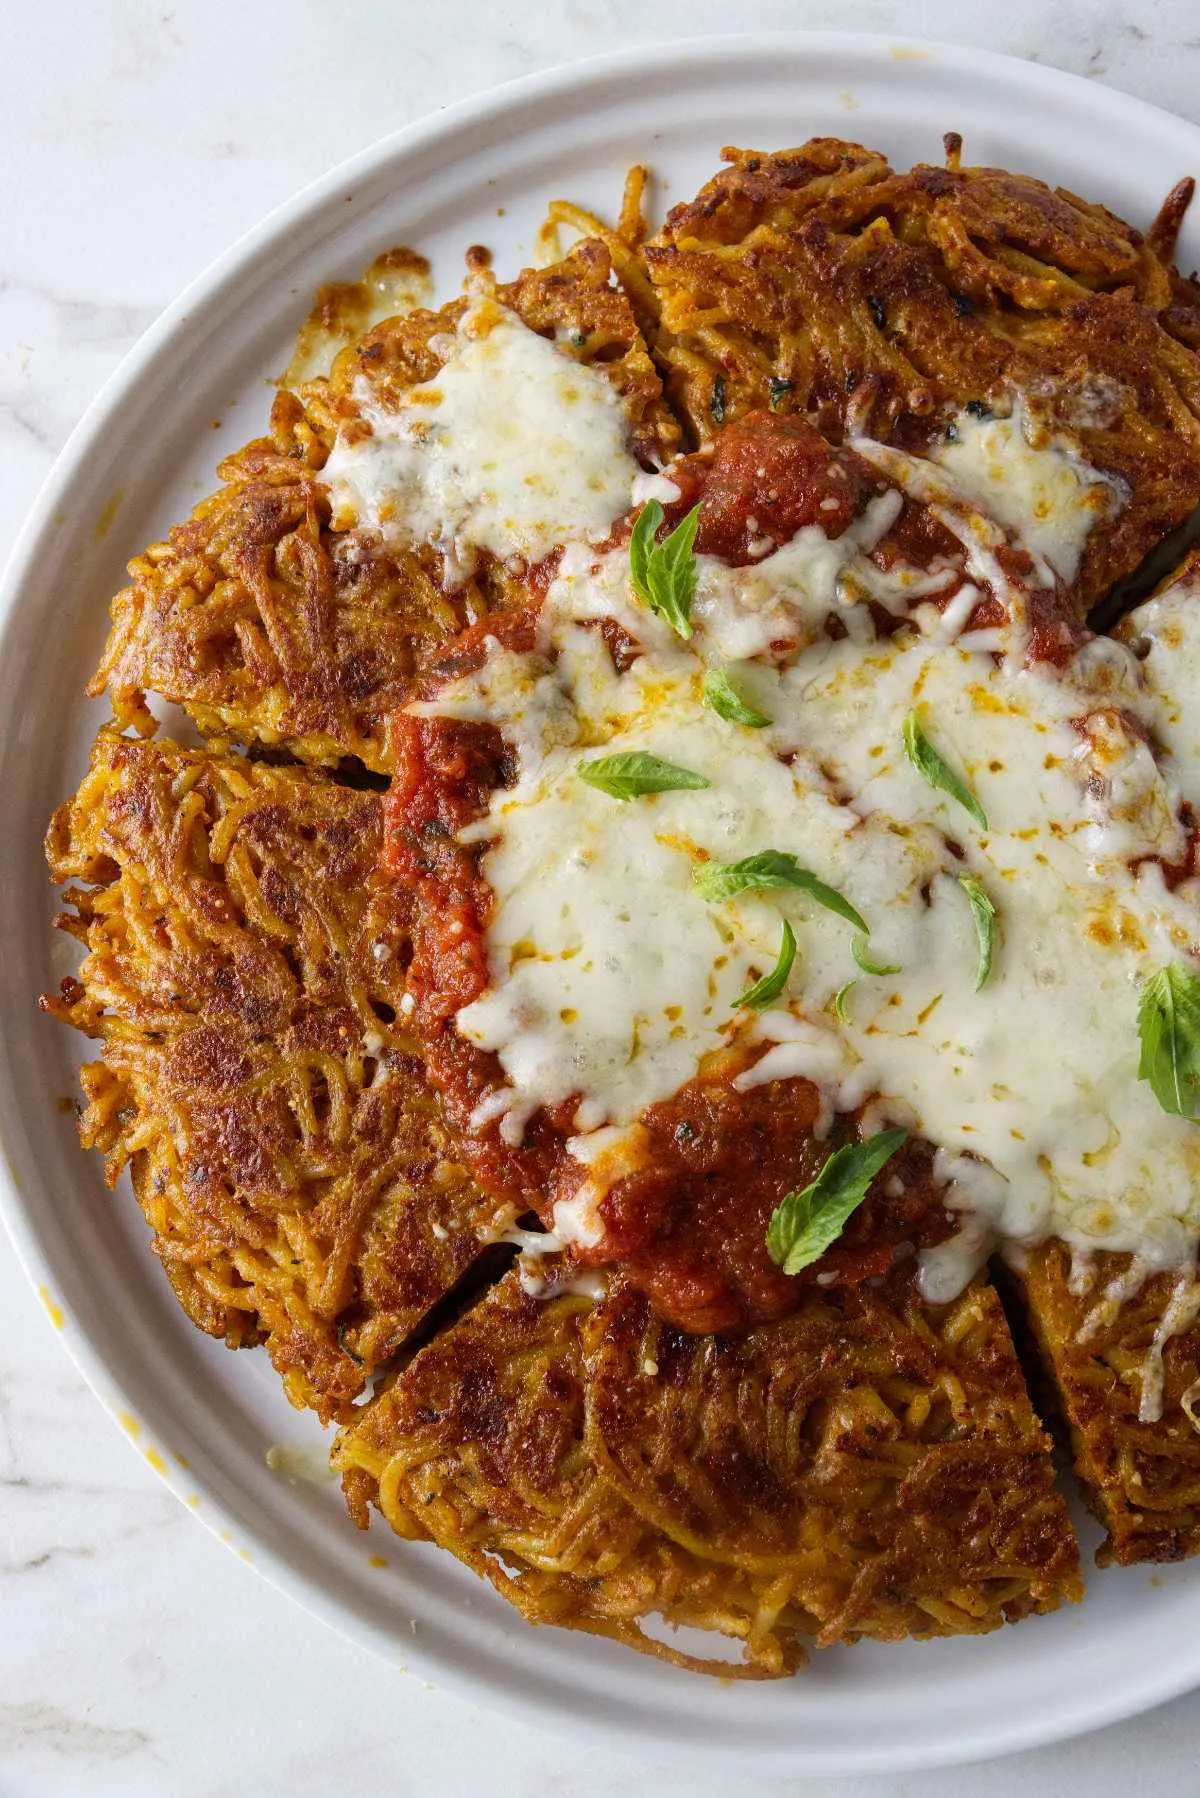 A serving plate with fried spaghetti topped with marinara sauce and cheese.